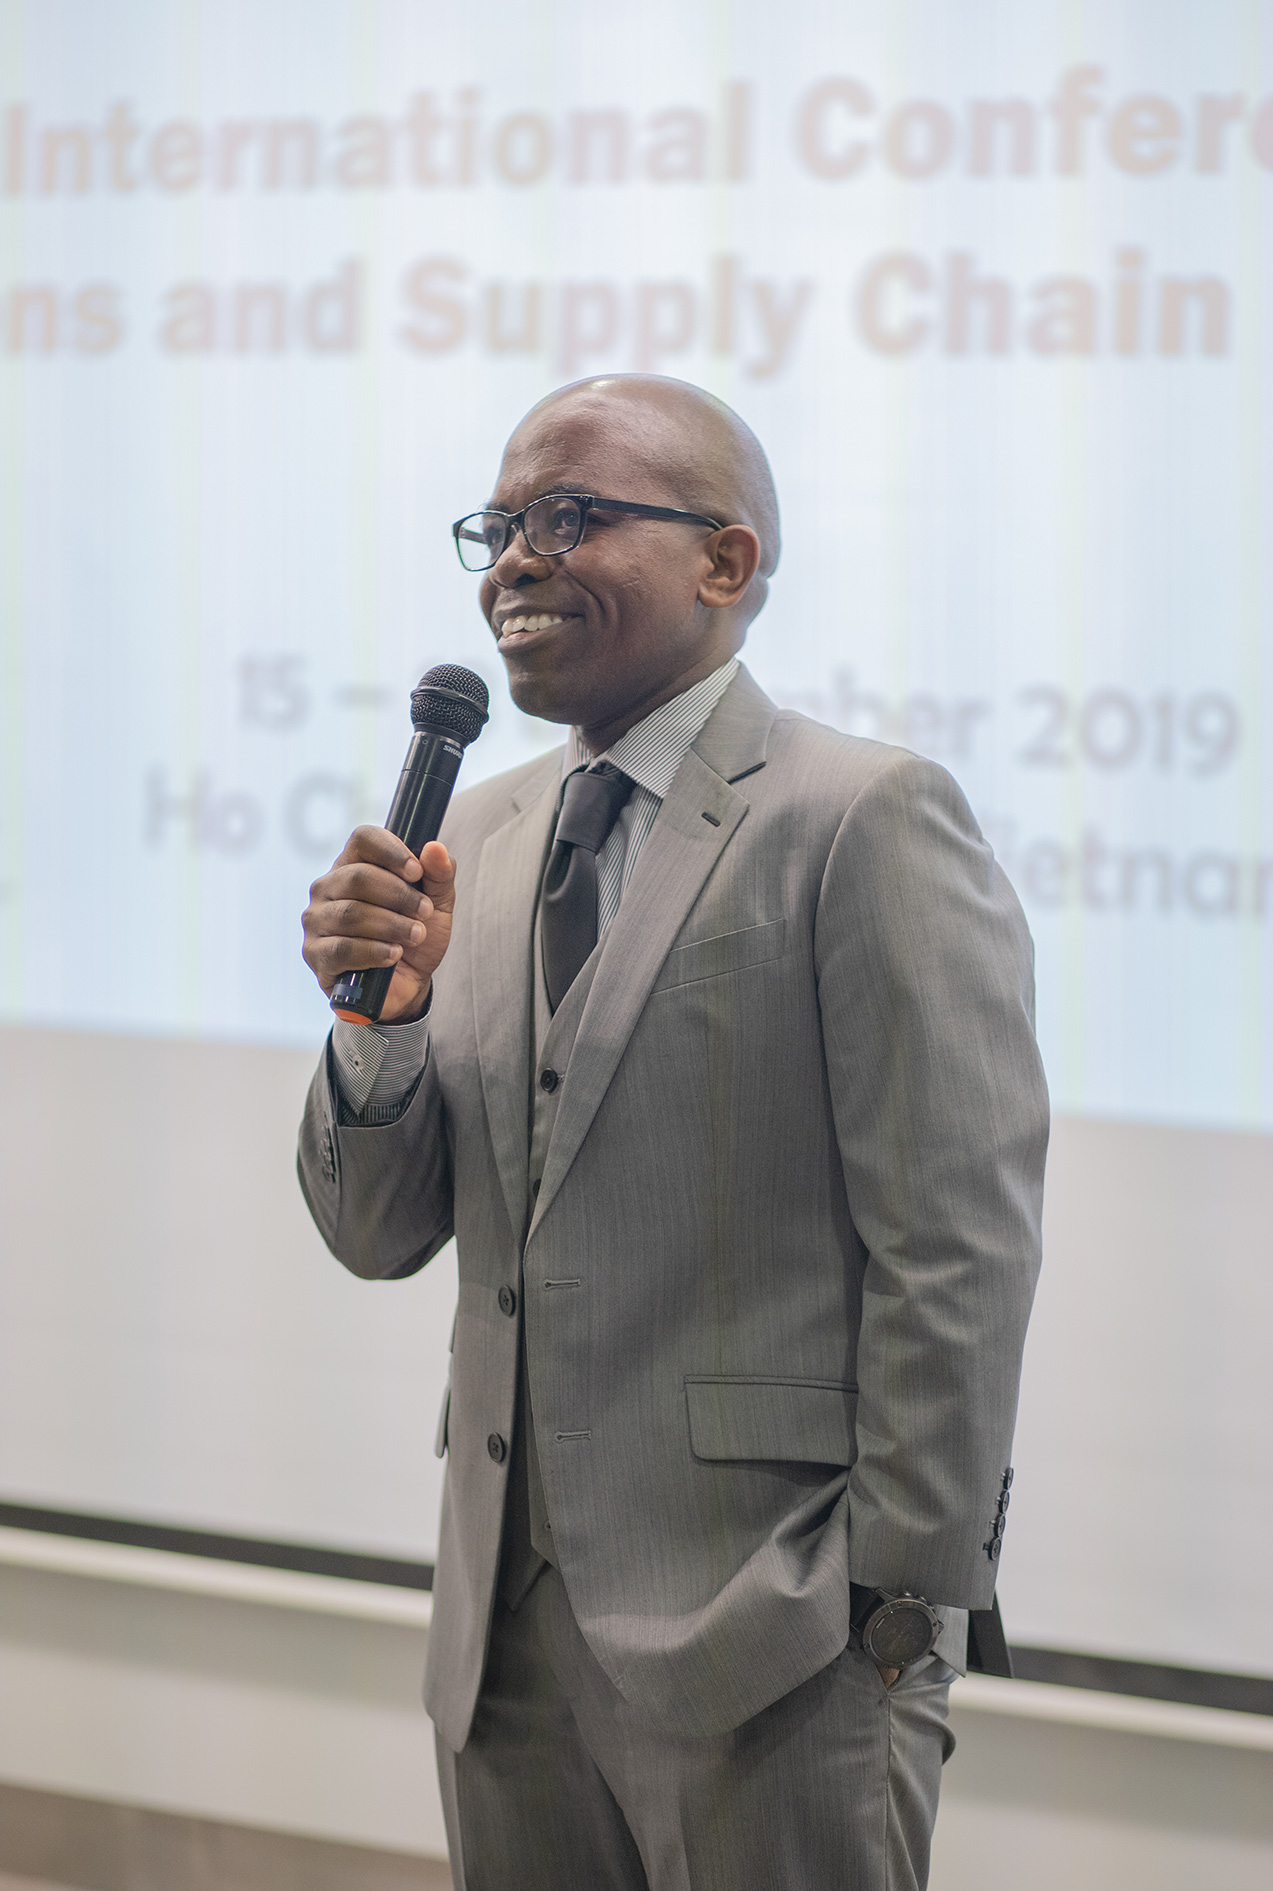 RMIT School of Business & Management Head Mathews Nkhoma welcomed the keynote speakers and conference attendees to the Operations and Supply Chain Management conference at RMIT’s Saigon South campus. 